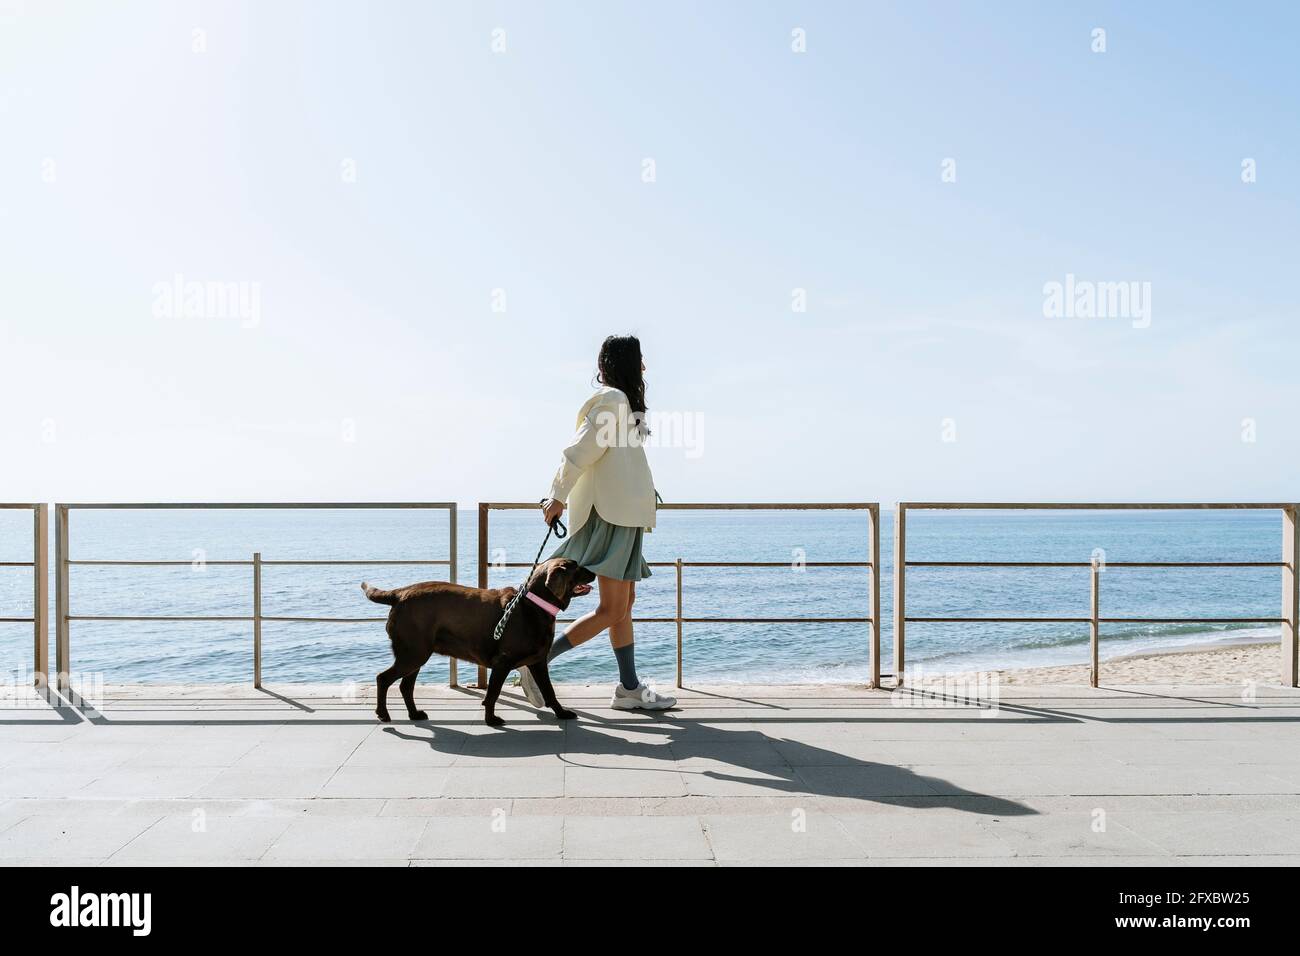 Mid adult woman walking with Labrador dog by railing at beach during sunny day Stock Photo